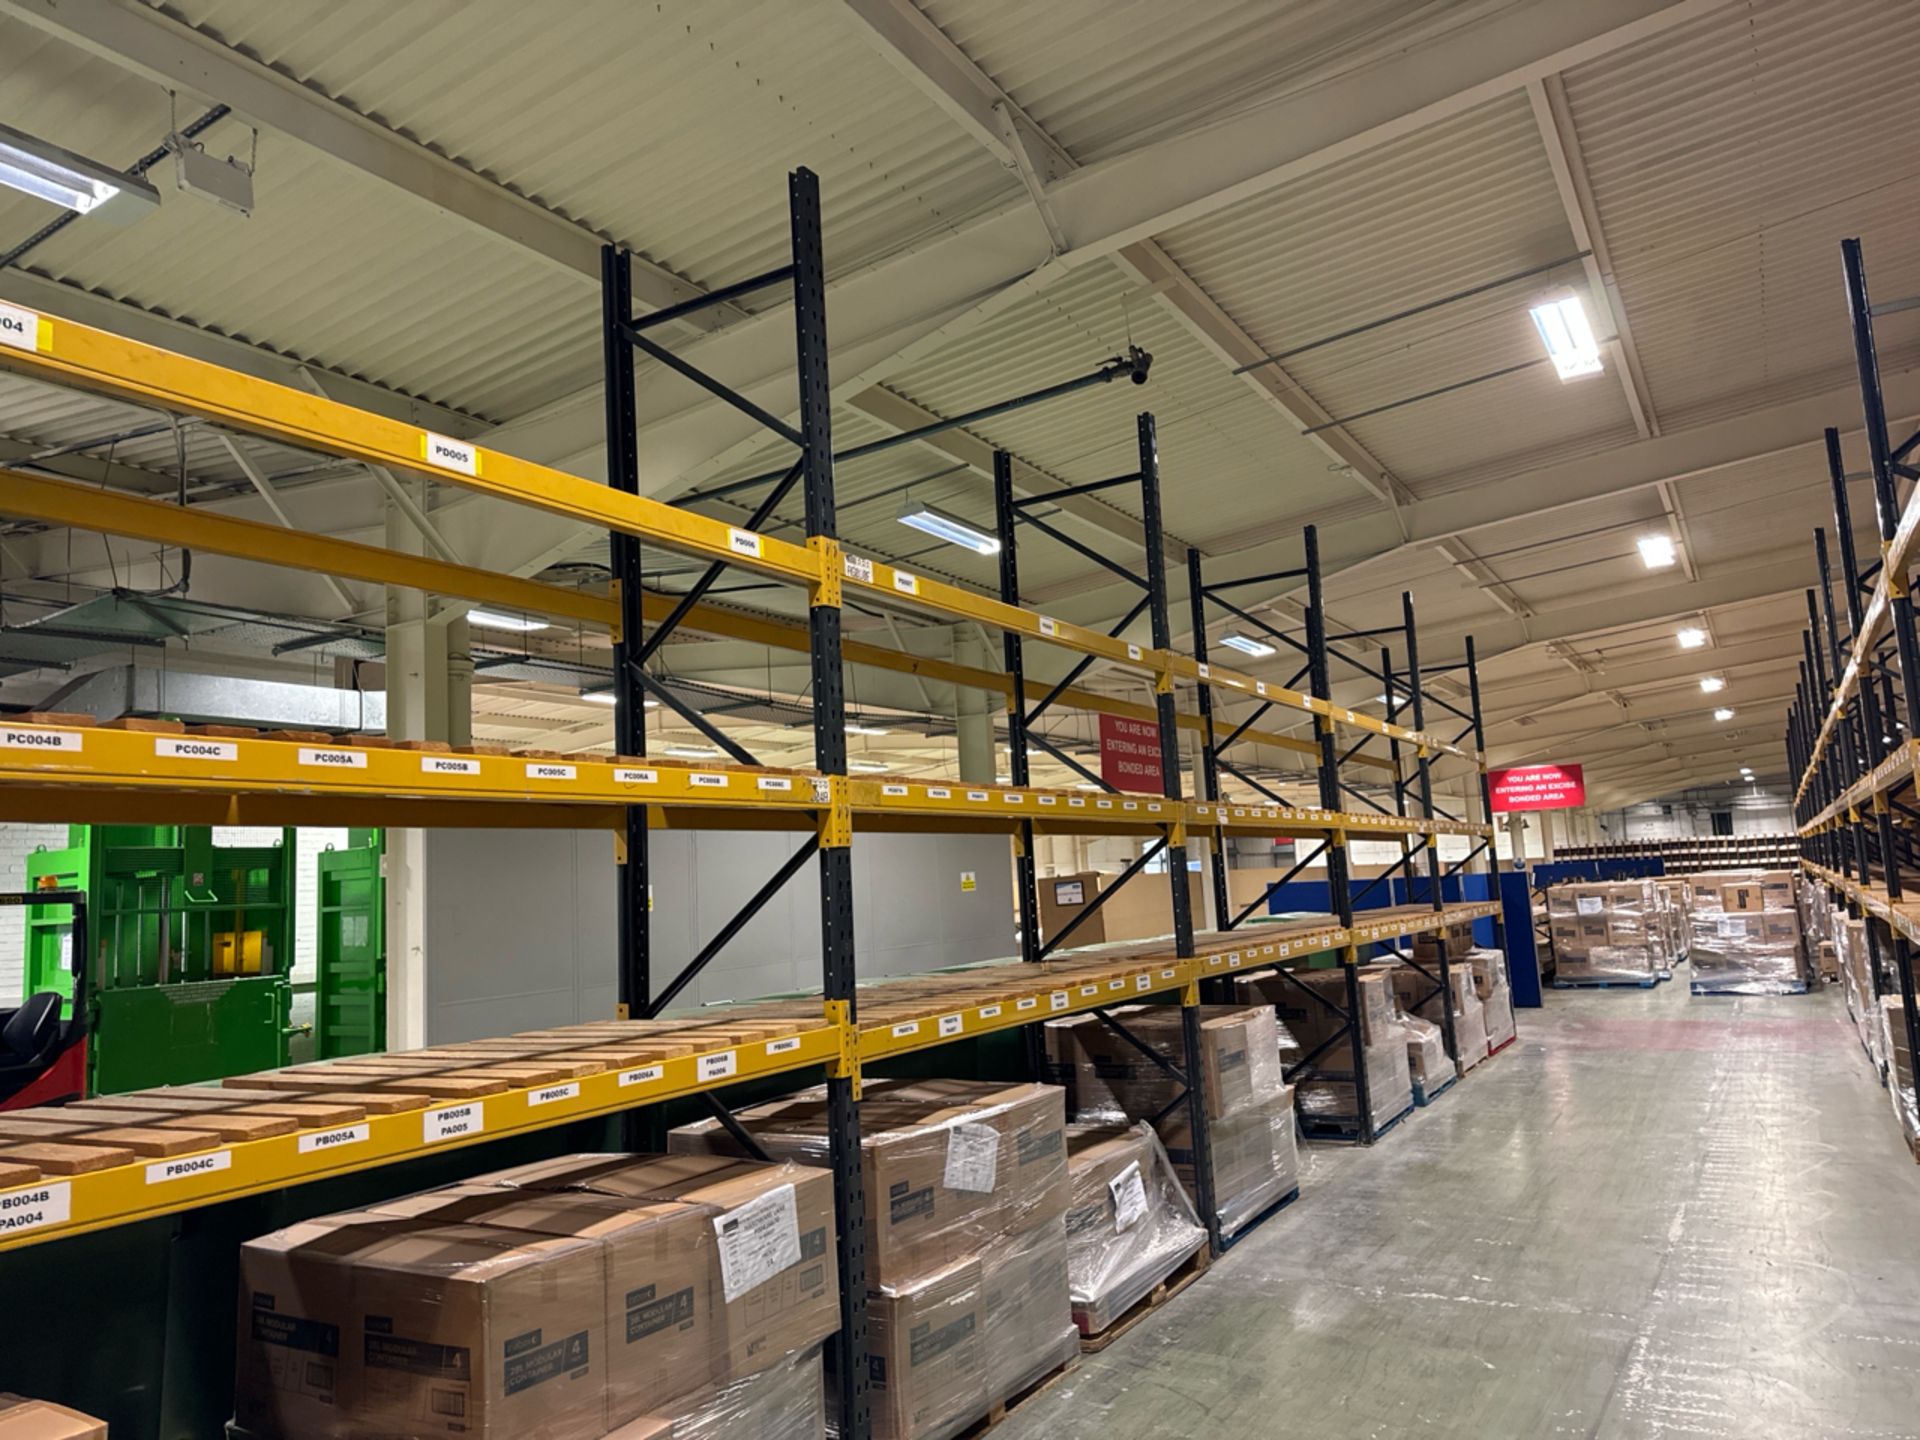 6 Bays Of Boltless Industrial Pallet Racking - Image 4 of 8